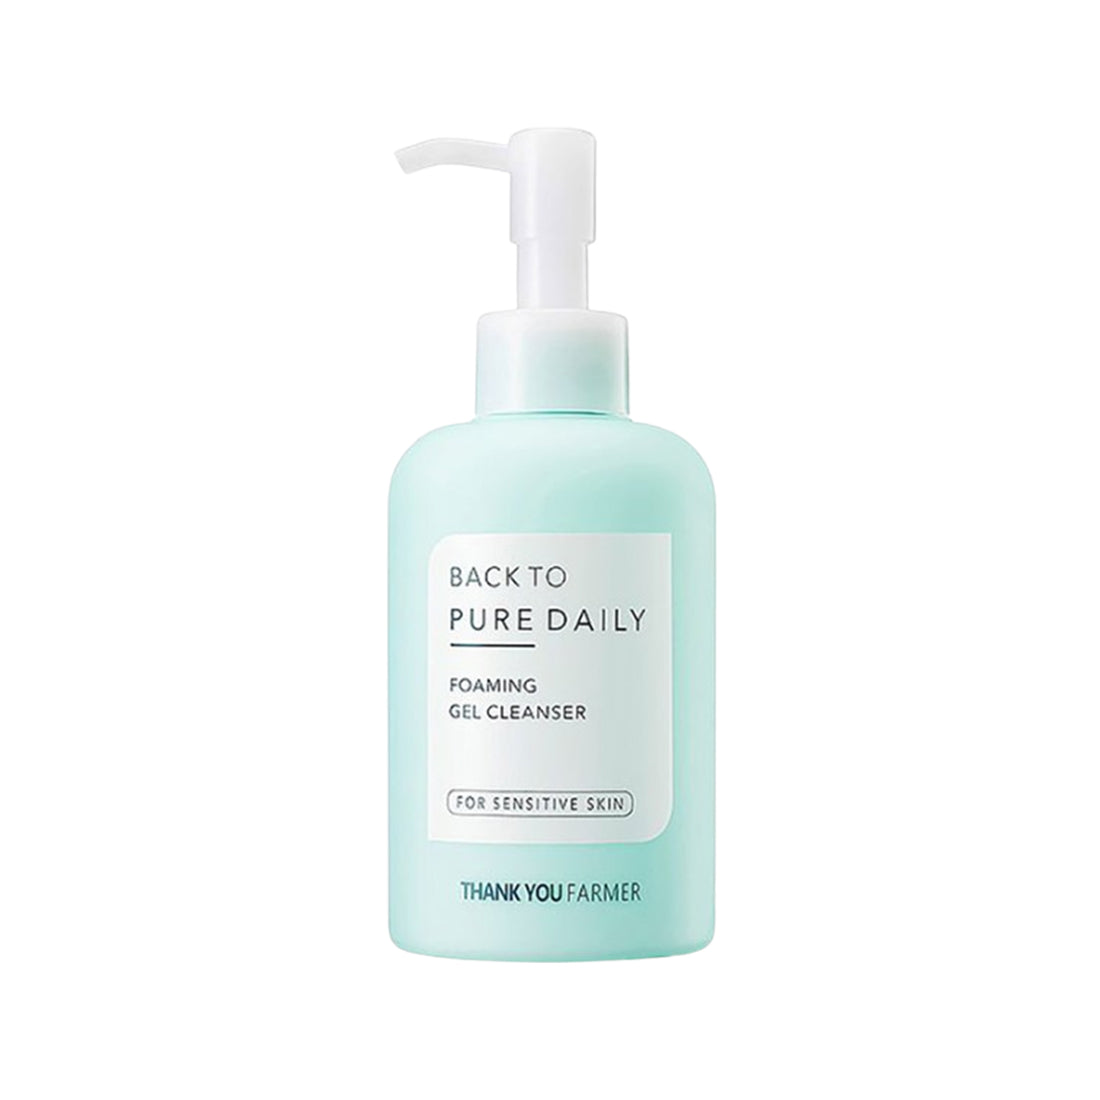 Back To Pure Daily Foaming Gel Cleanser